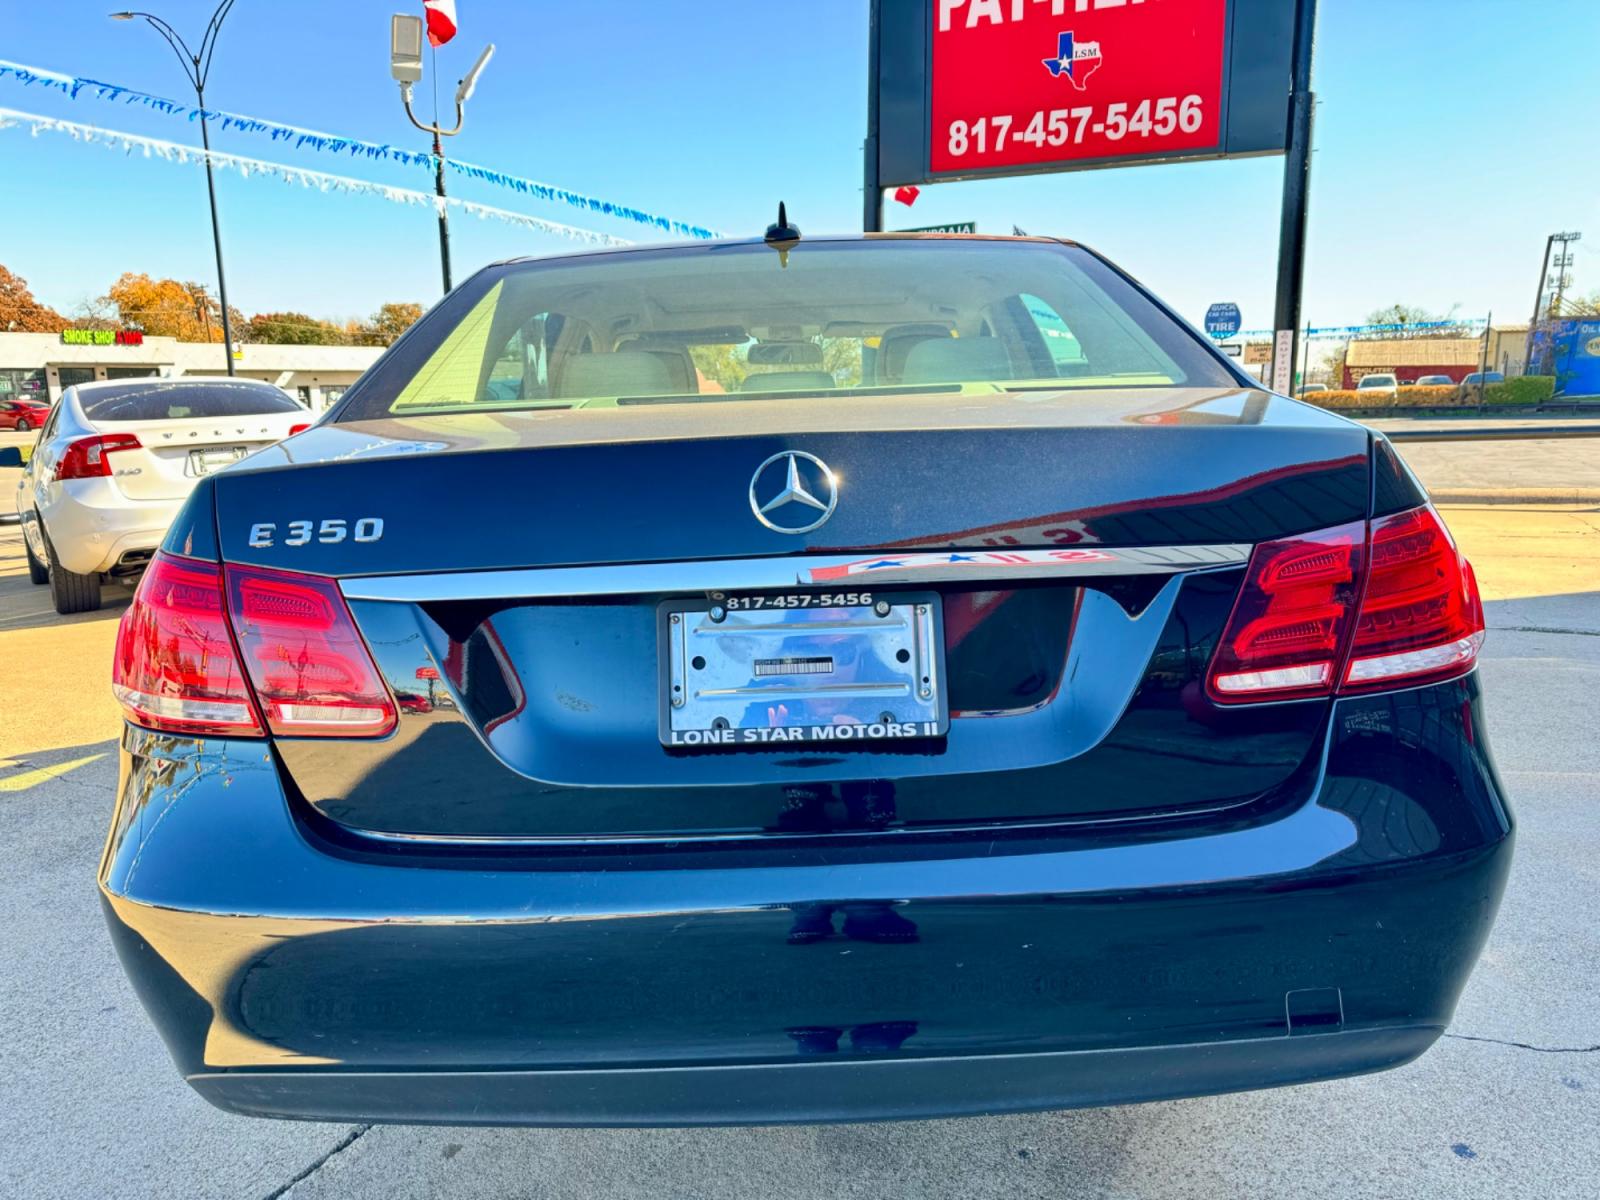 2014 BLACK MERCEDES-BENZ E-CLASS E350 (WDDHF5KB1EA) , located at 5900 E. Lancaster Ave., Fort Worth, TX, 76112, (817) 457-5456, 0.000000, 0.000000 - This is a 2014 MERCEDES-BENZ E-CLASS E350 4 DOOR SEDAN that is in excellent condition. There are no dents or scratches. The interior is clean with no rips or tears or stains. All power windows, door locks and seats. Ice cold AC for those hot Texas summer days. It is equipped with a CD player, AM/FM - Photo #4